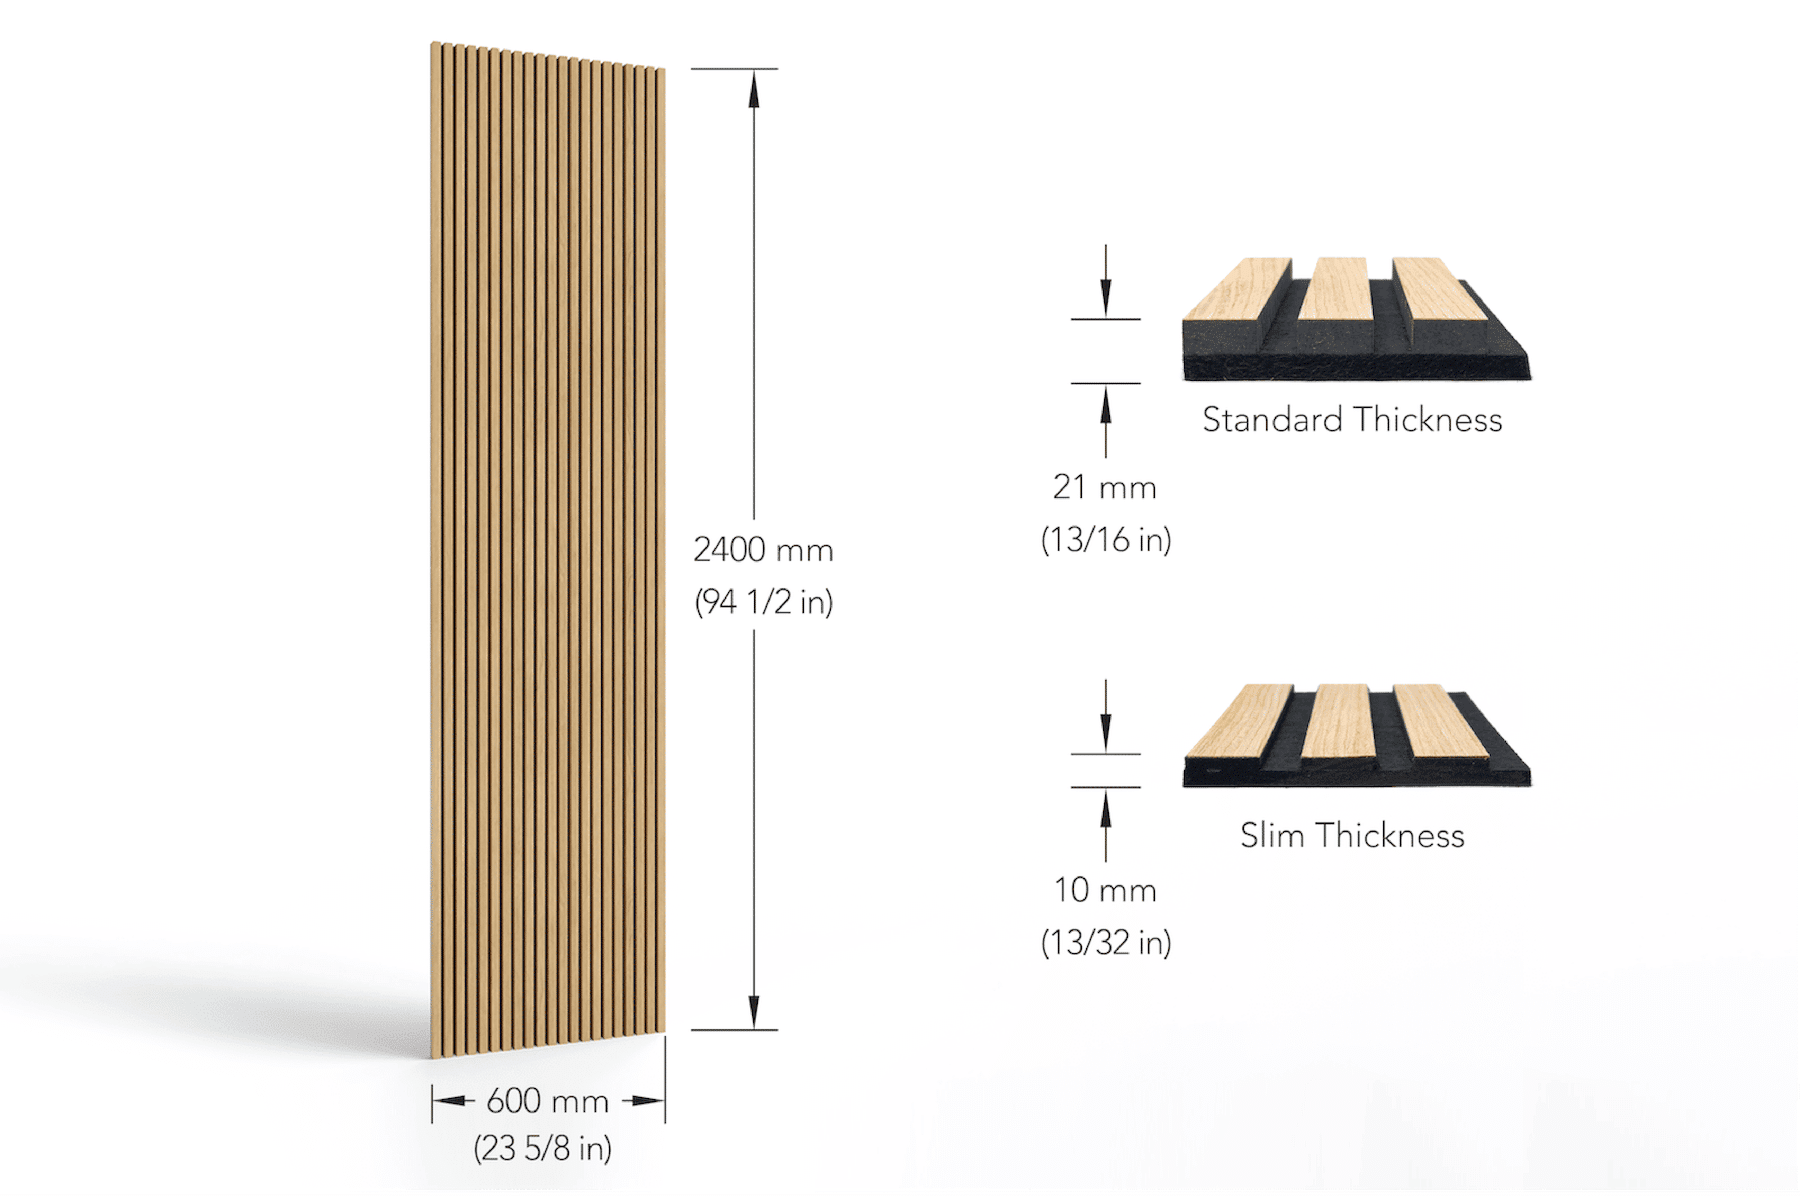 Dimensions of an acoustic wood slat panel. Height, width, and thickness dimensions called out in inches and millimeters. 